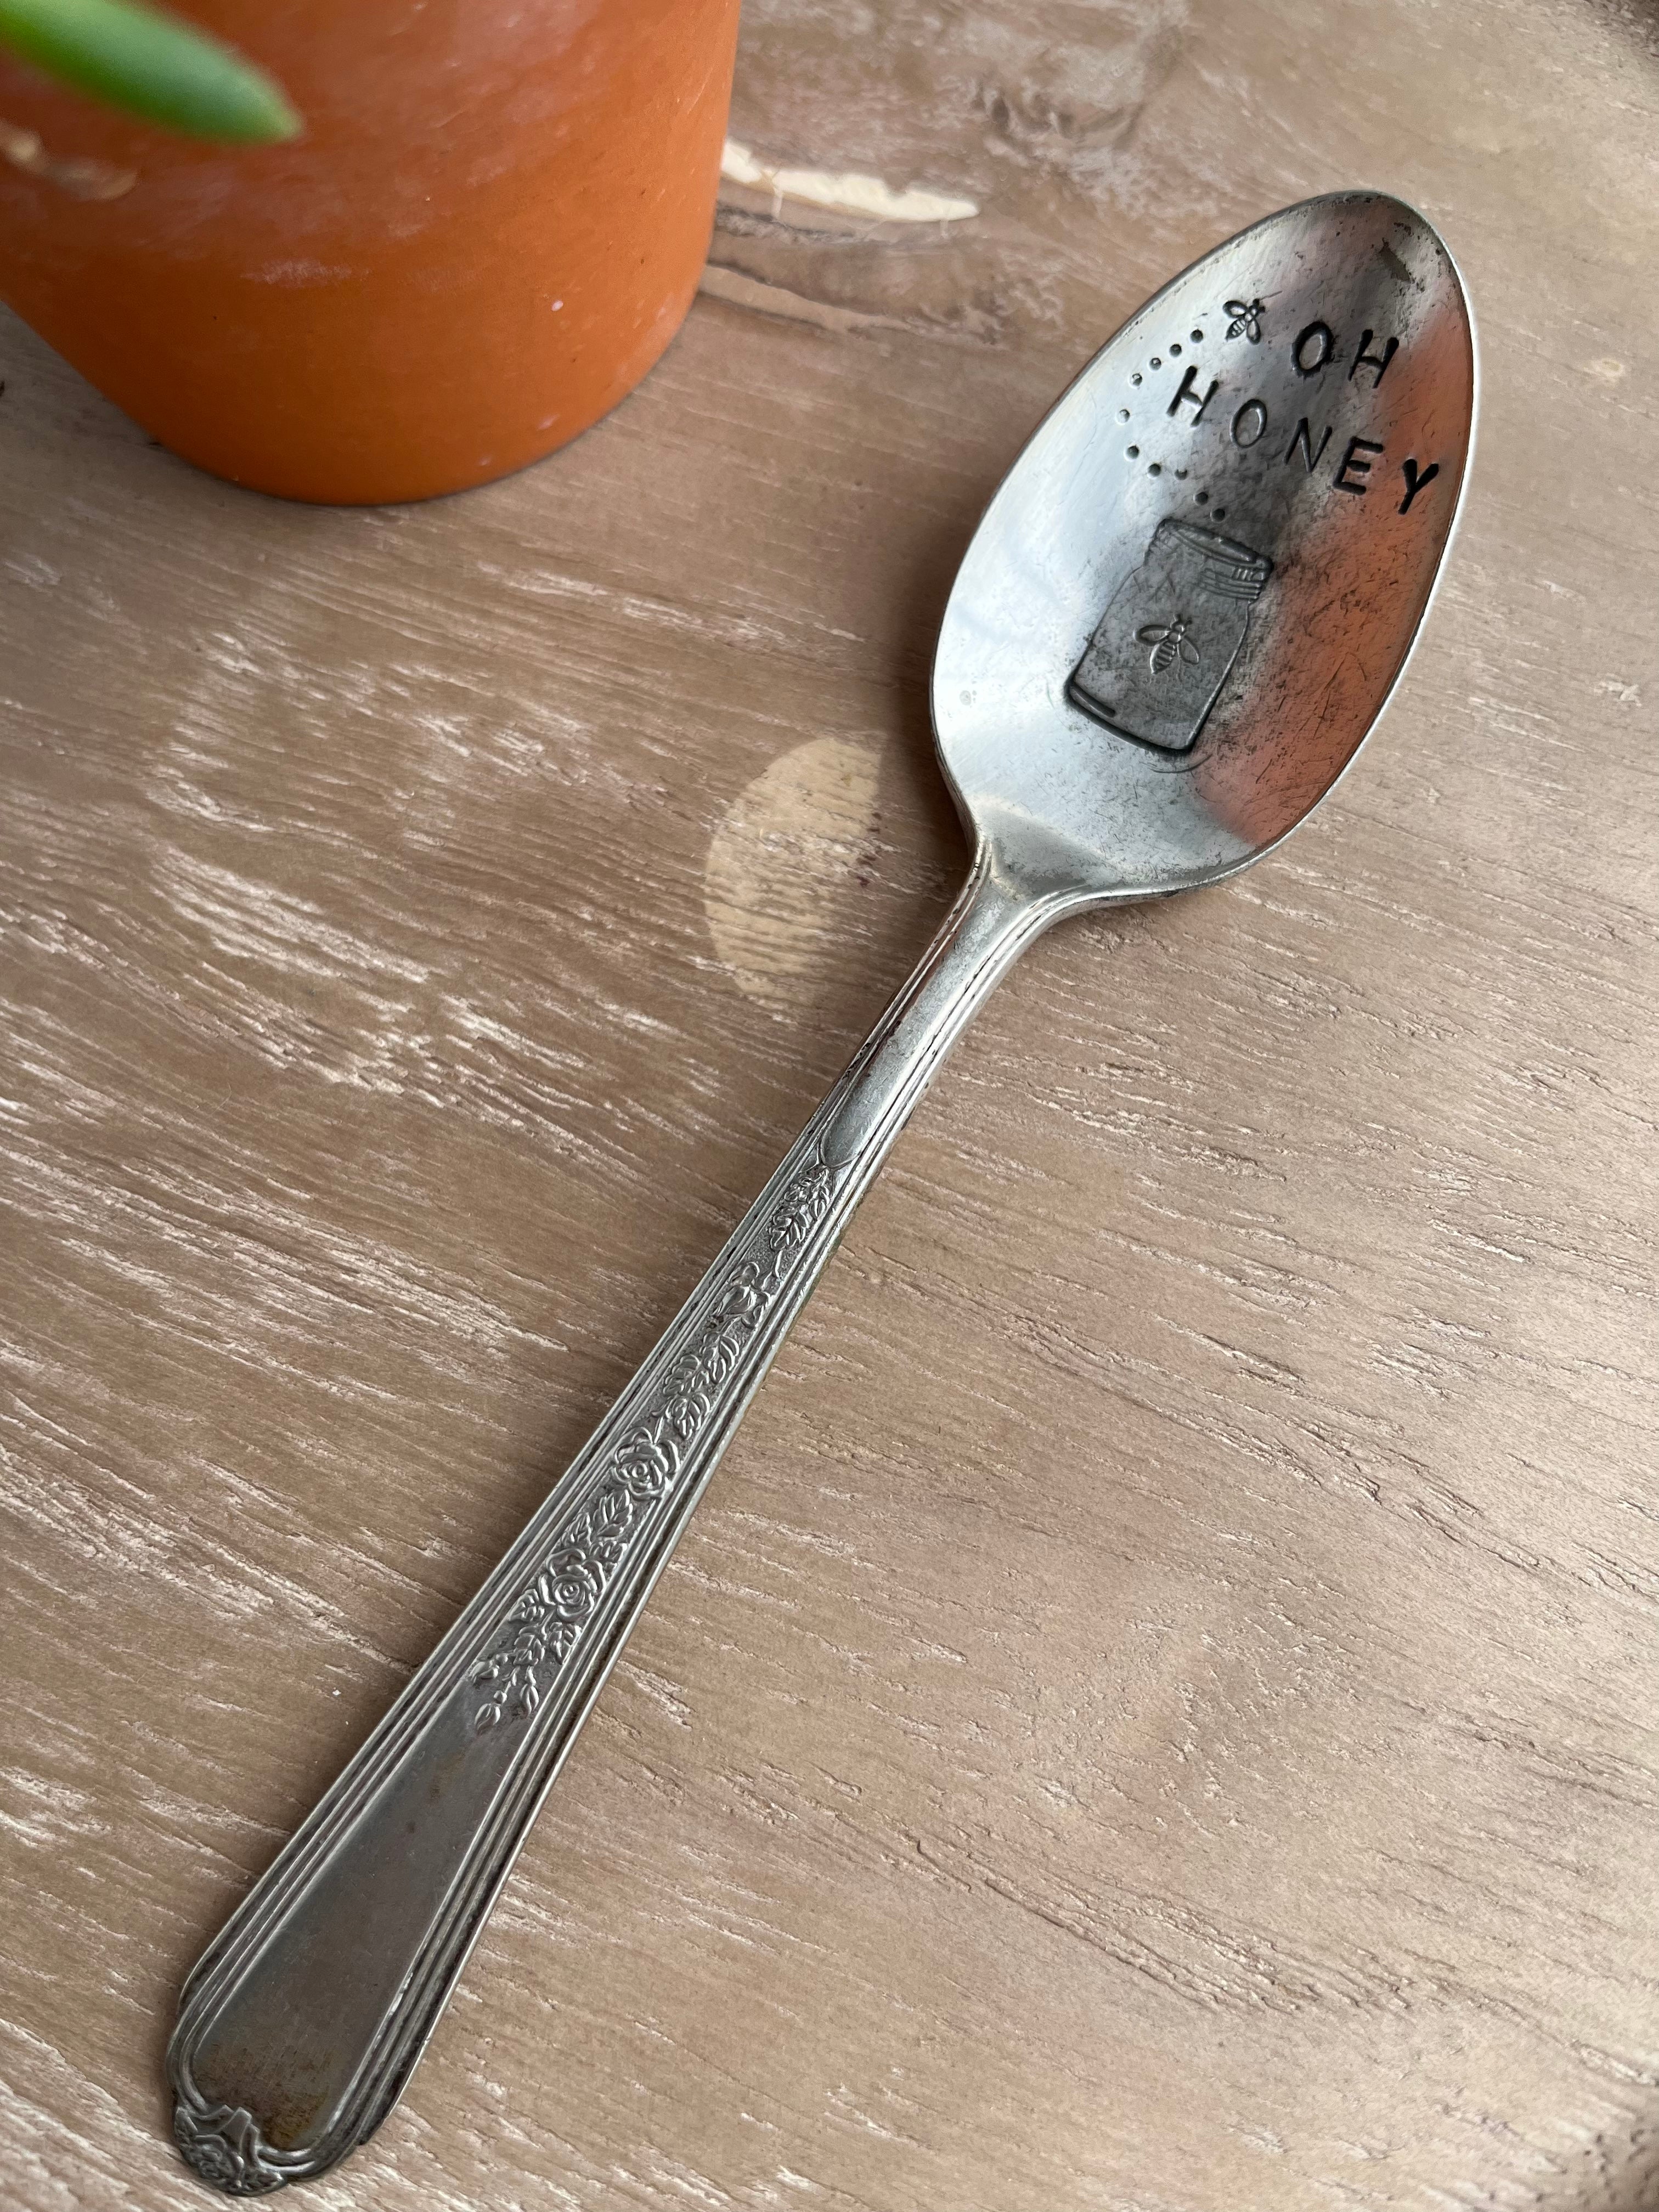 Oh Honey - Stamped Spoons from the Cabin Table